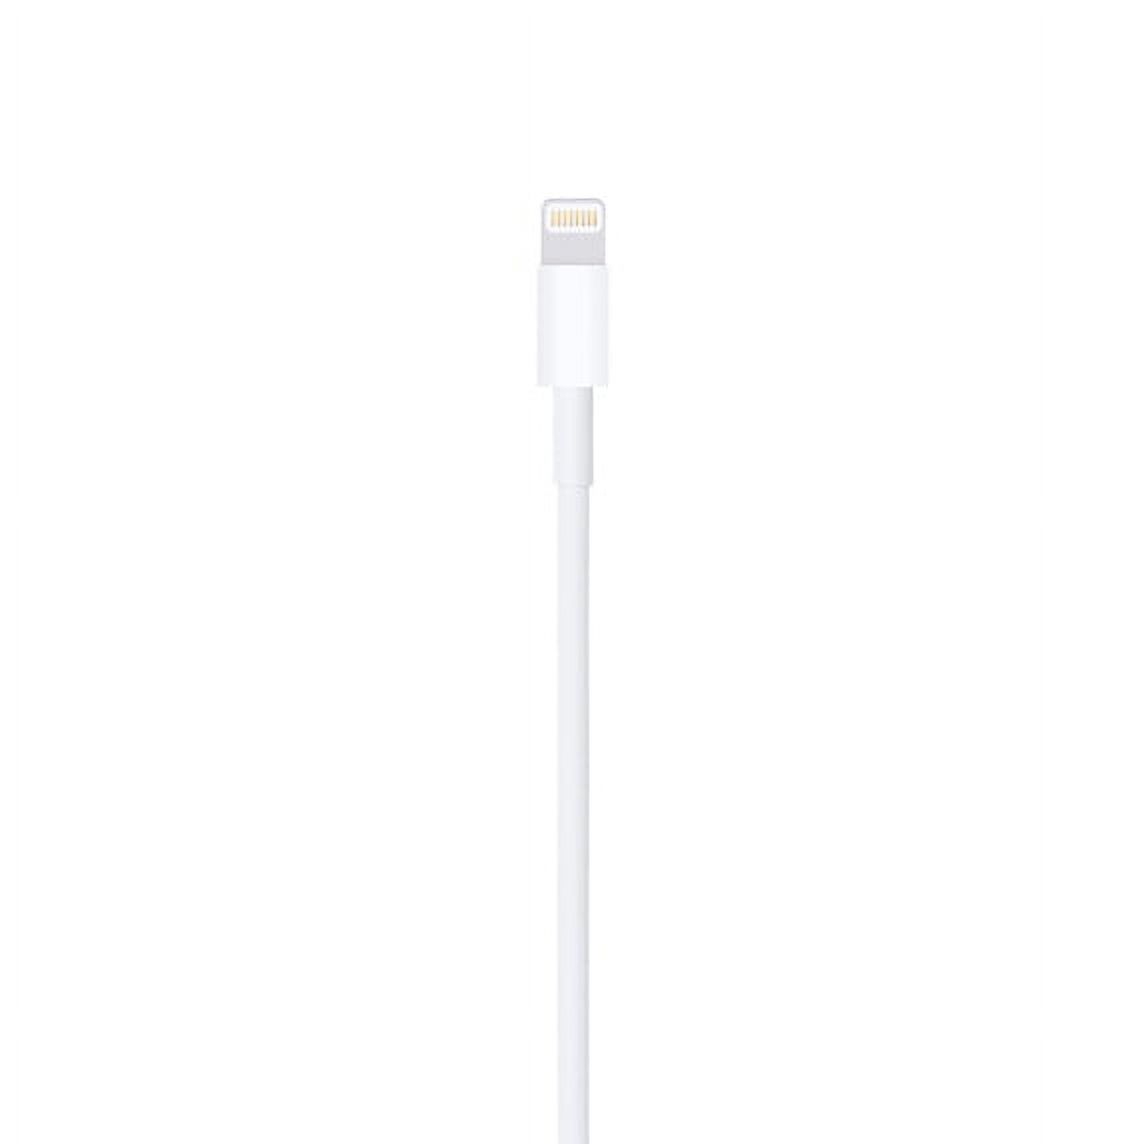 Apple USB-A to Lightning Cable for iPhone, iPad, Airpods, iPod - 6.6ft or 2m - image 3 of 4